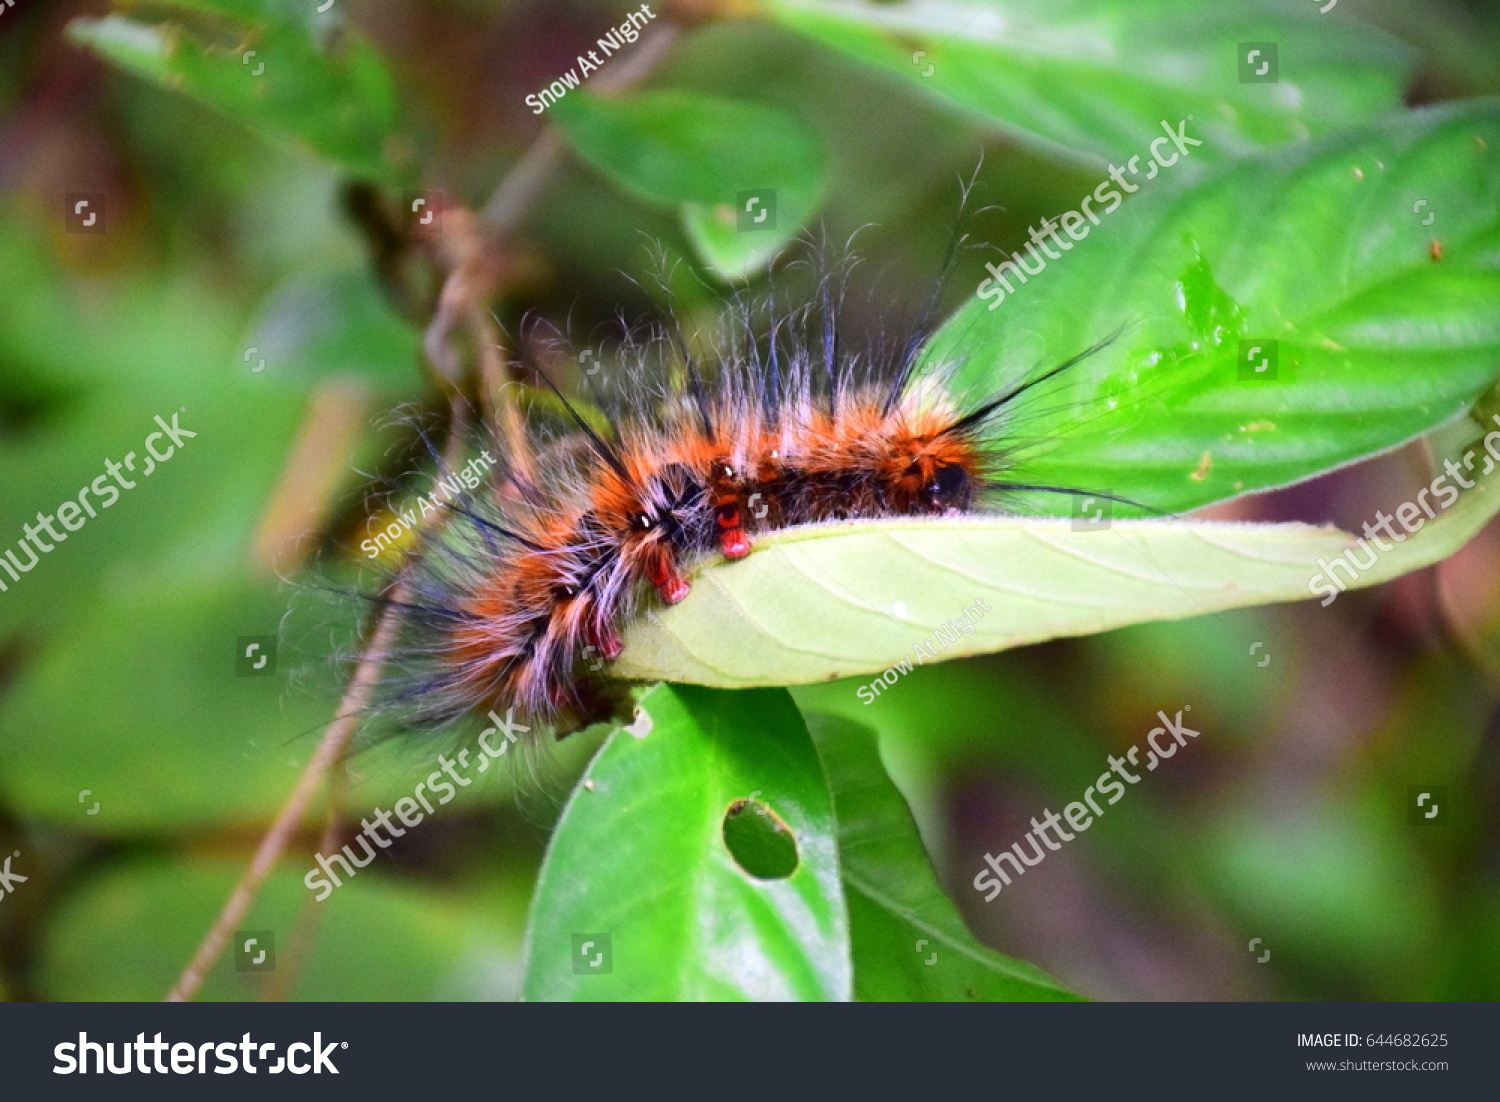 Orange caterpillar with white and black hair on the leaf in tropical forest #644682625